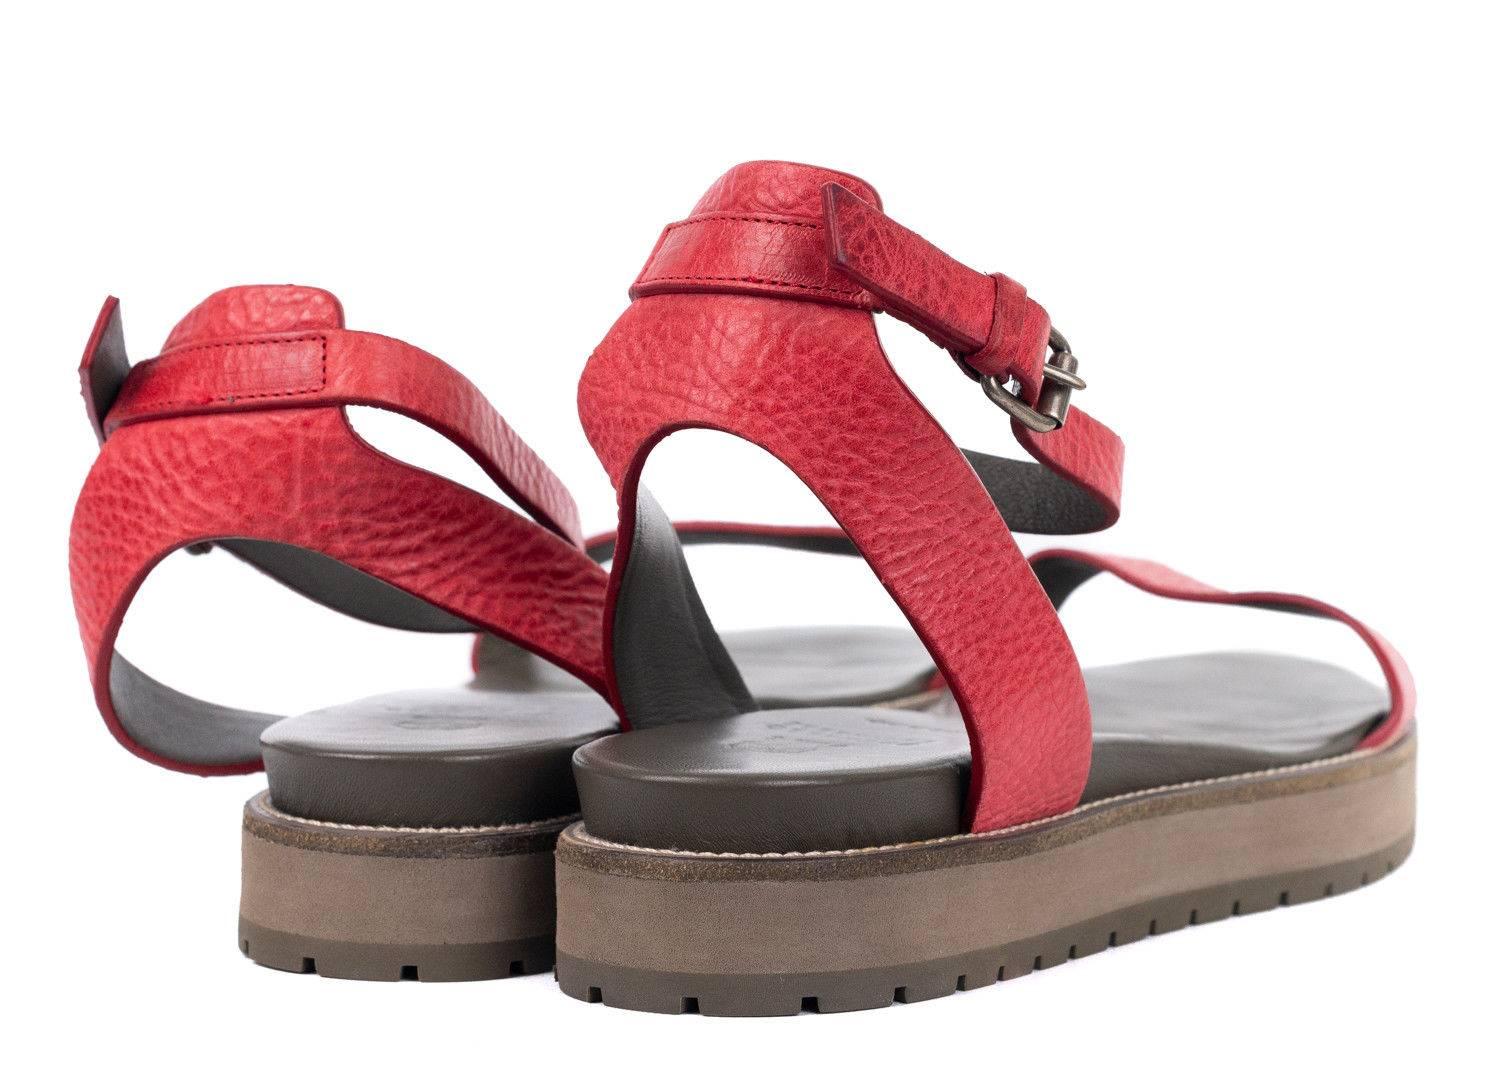 Brand New with original box and dust bag

Retails in Stores and Online for $1295

Size European 40 US 10

Take the time out to enjoy your day in your Brunello Cucinelli Sandals. The platform beauties feature a durable lug sole, grained red leather